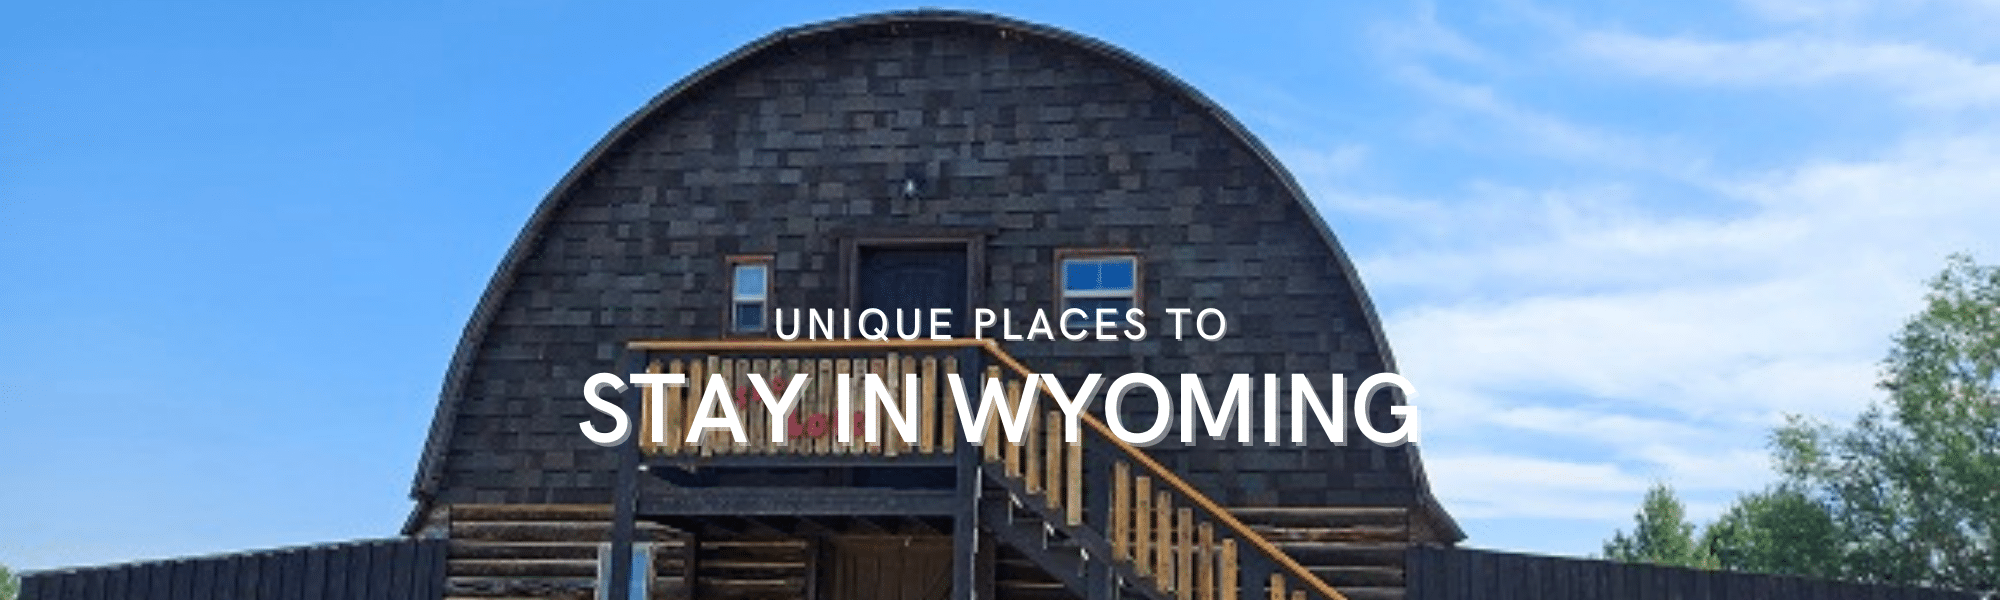 Unique Places to Stay in Wyoming